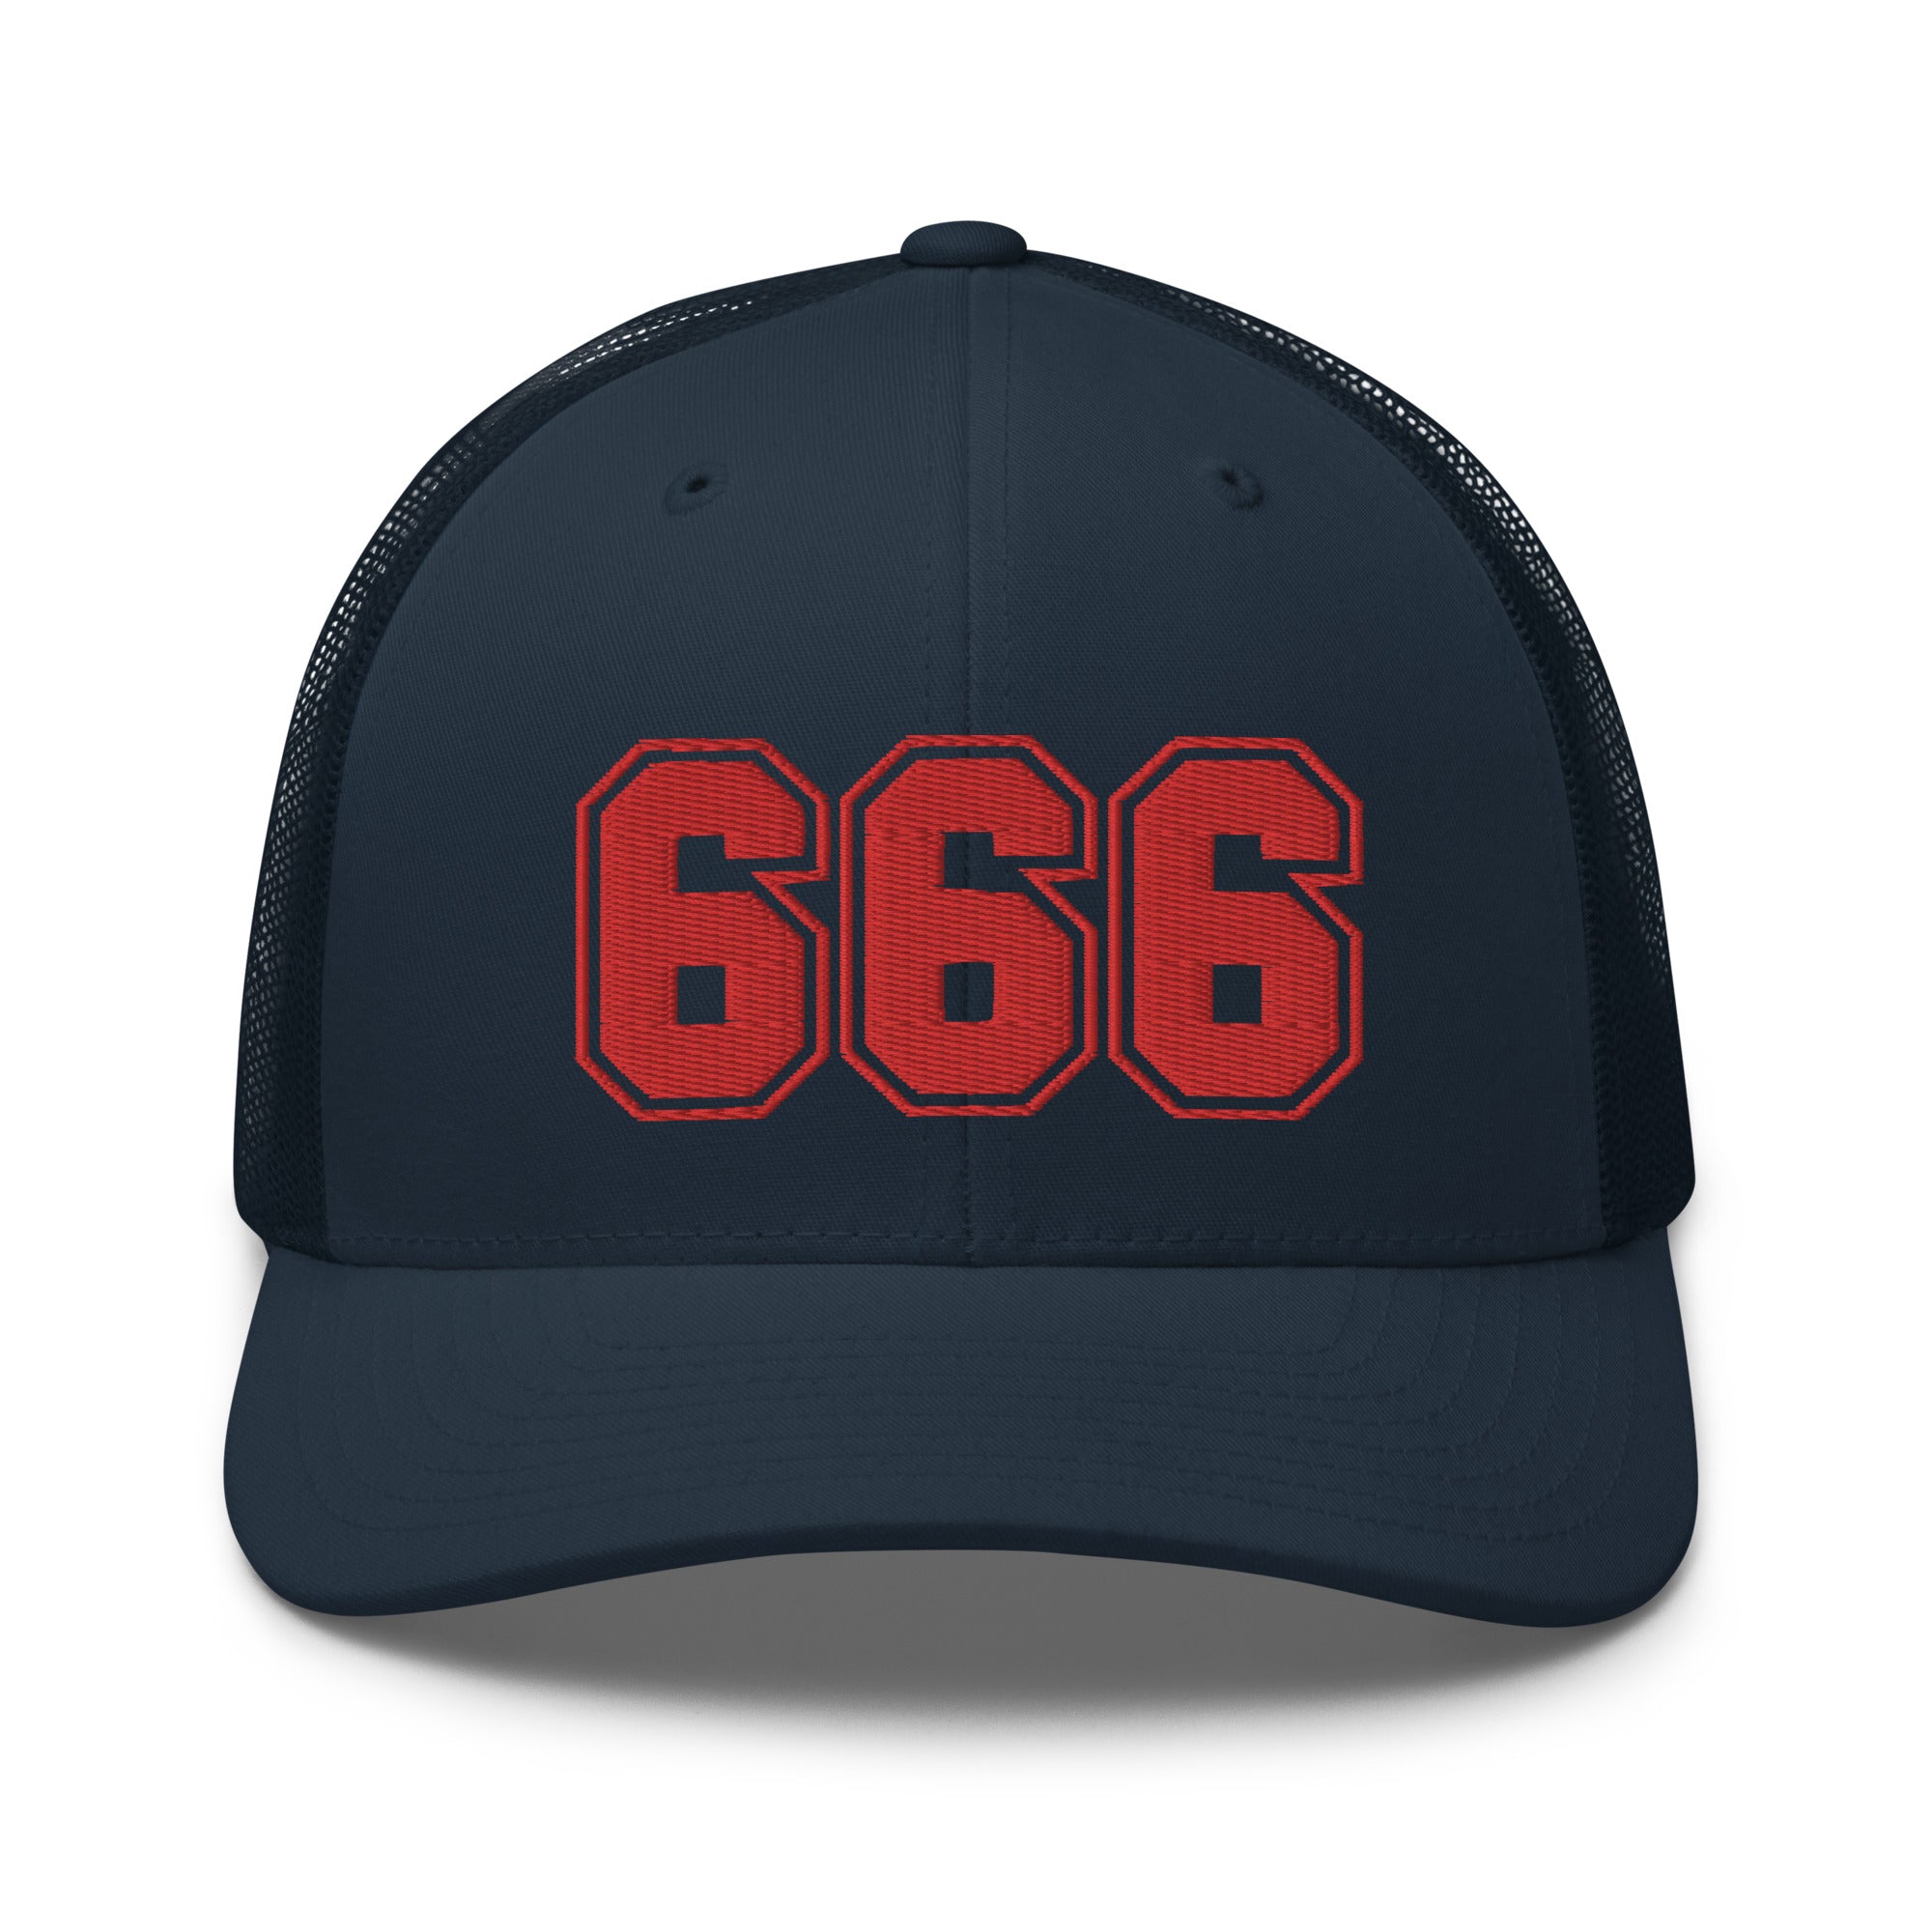 Red 666 Number of the Beast Embroidered Retro Trucker Cap Snapback Hat